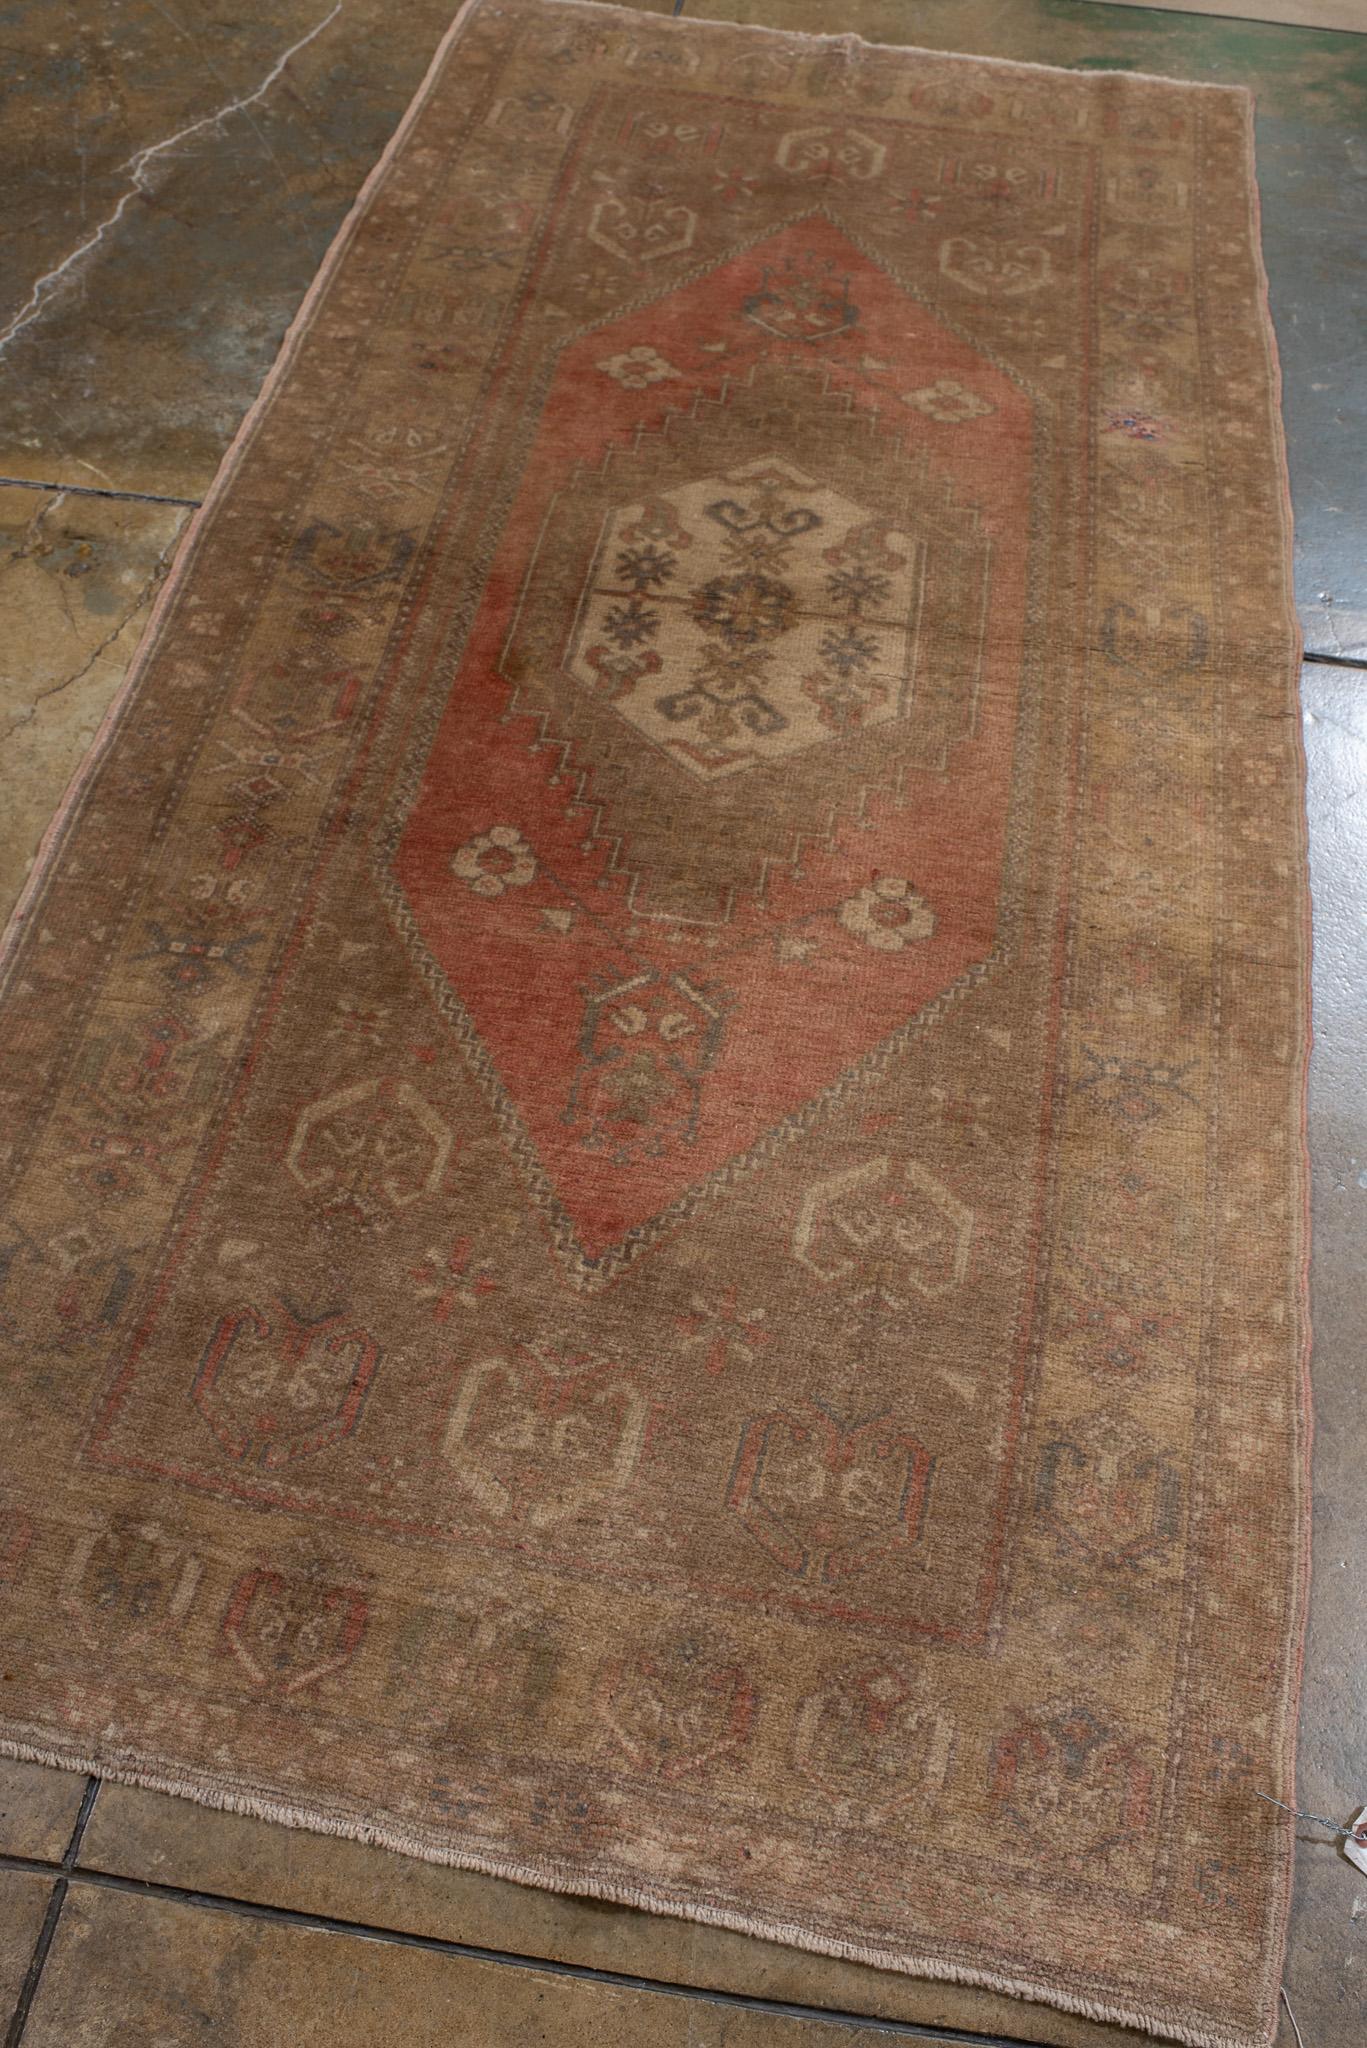 An Oushak Rug circa 1940. Hand Knotted and made of 100% wool yarn.